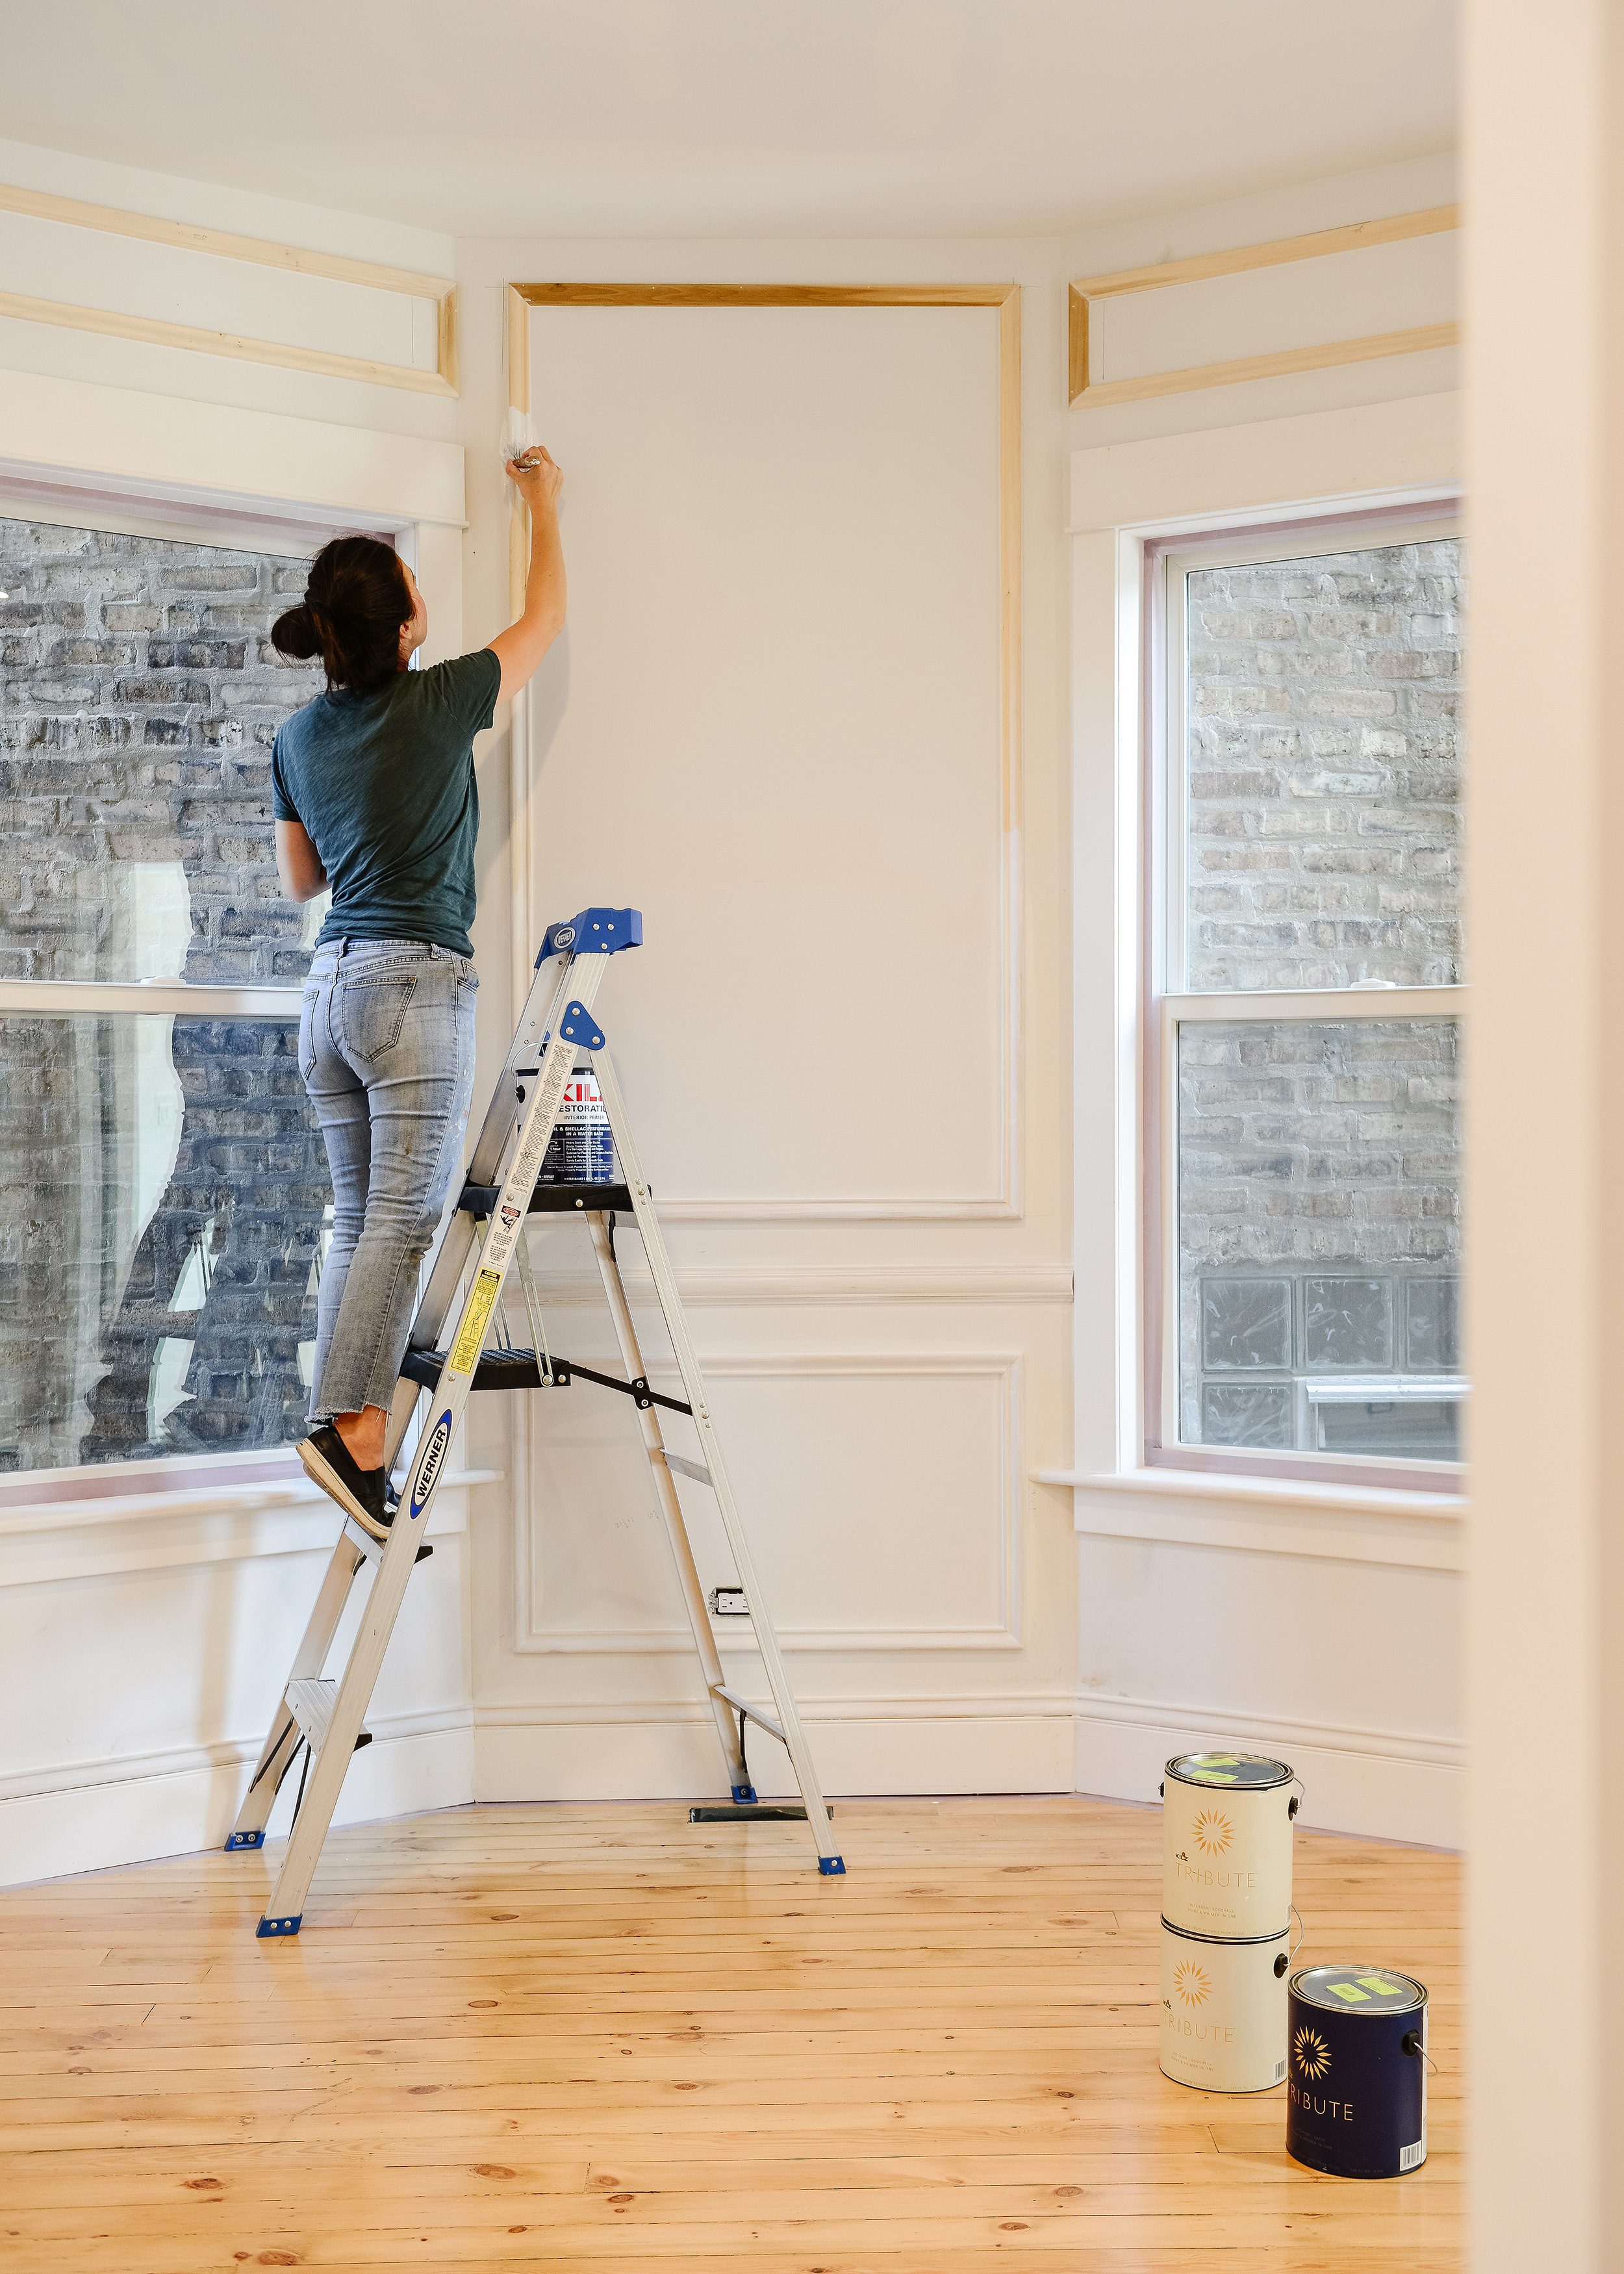 Priming panel molding before we paint the whole room | via Yellow Brick Home